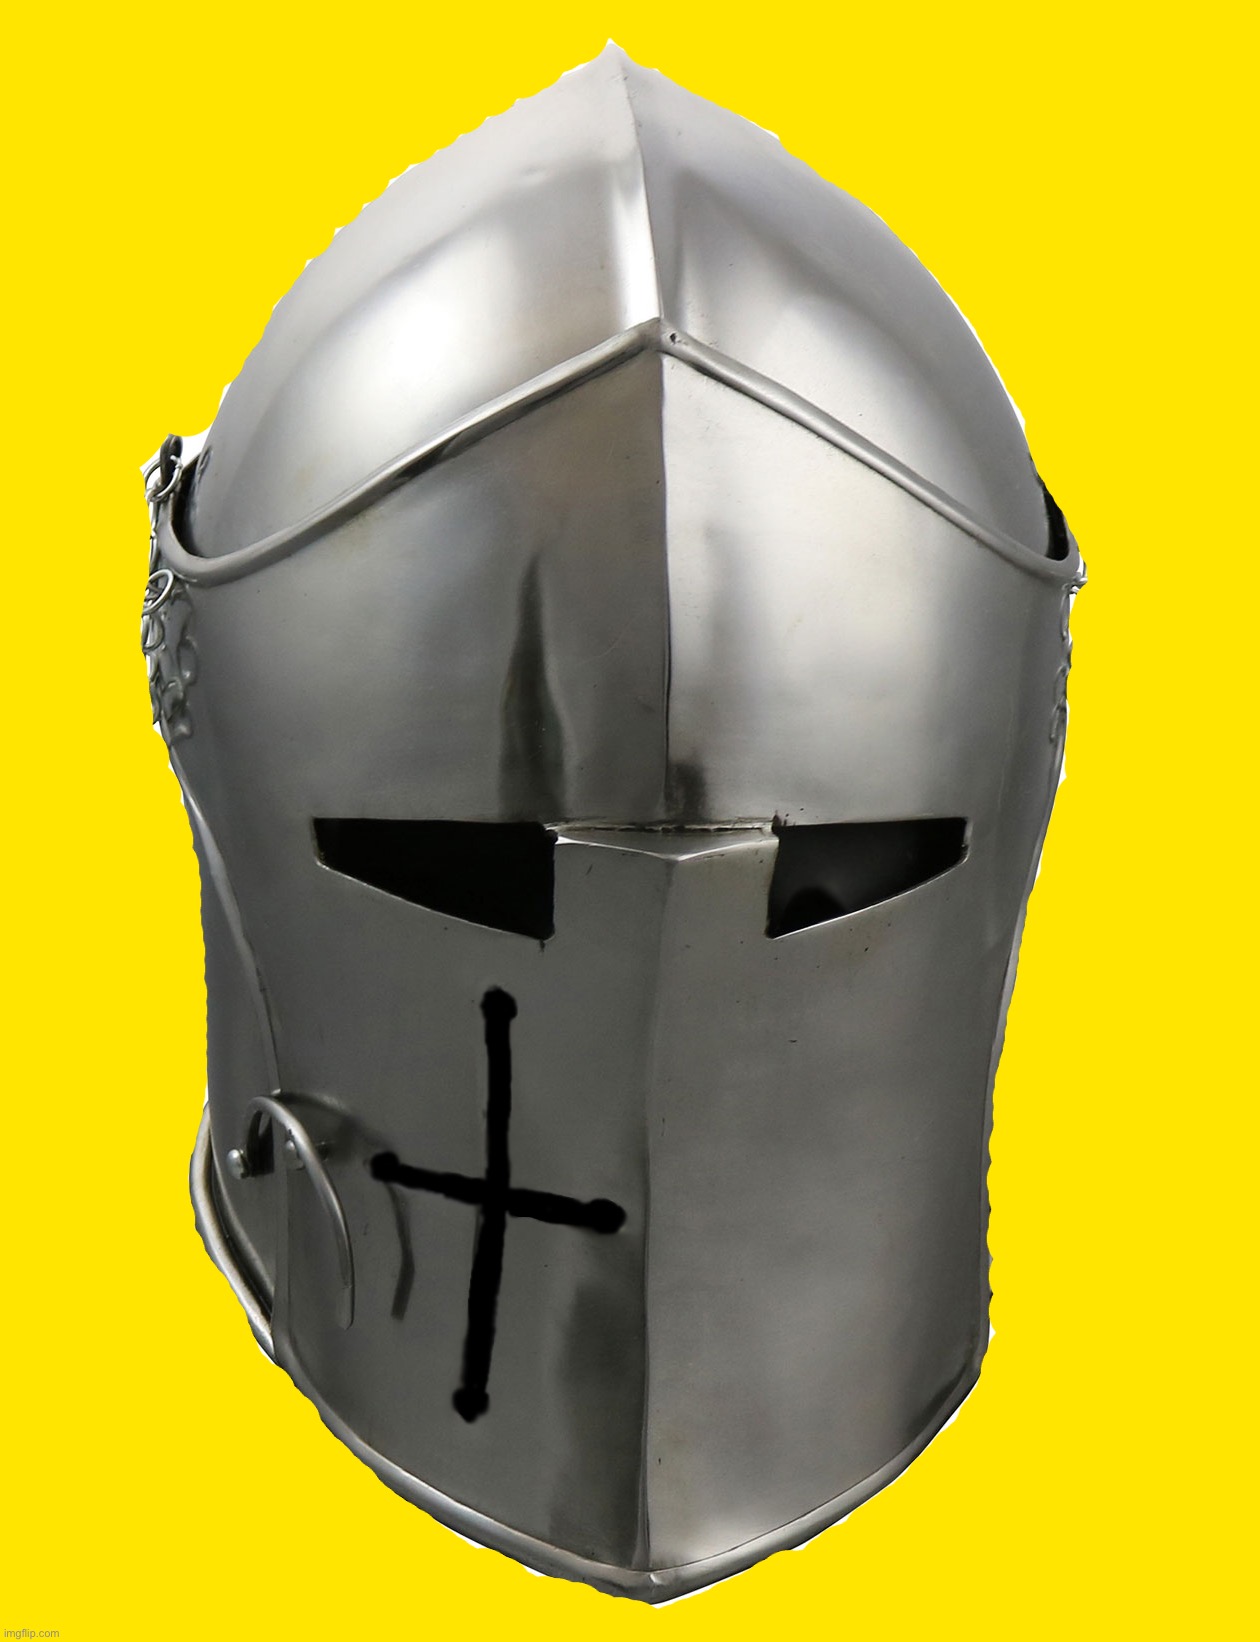 Crusader helmet grayscale | image tagged in crusader helmet grayscale | made w/ Imgflip meme maker